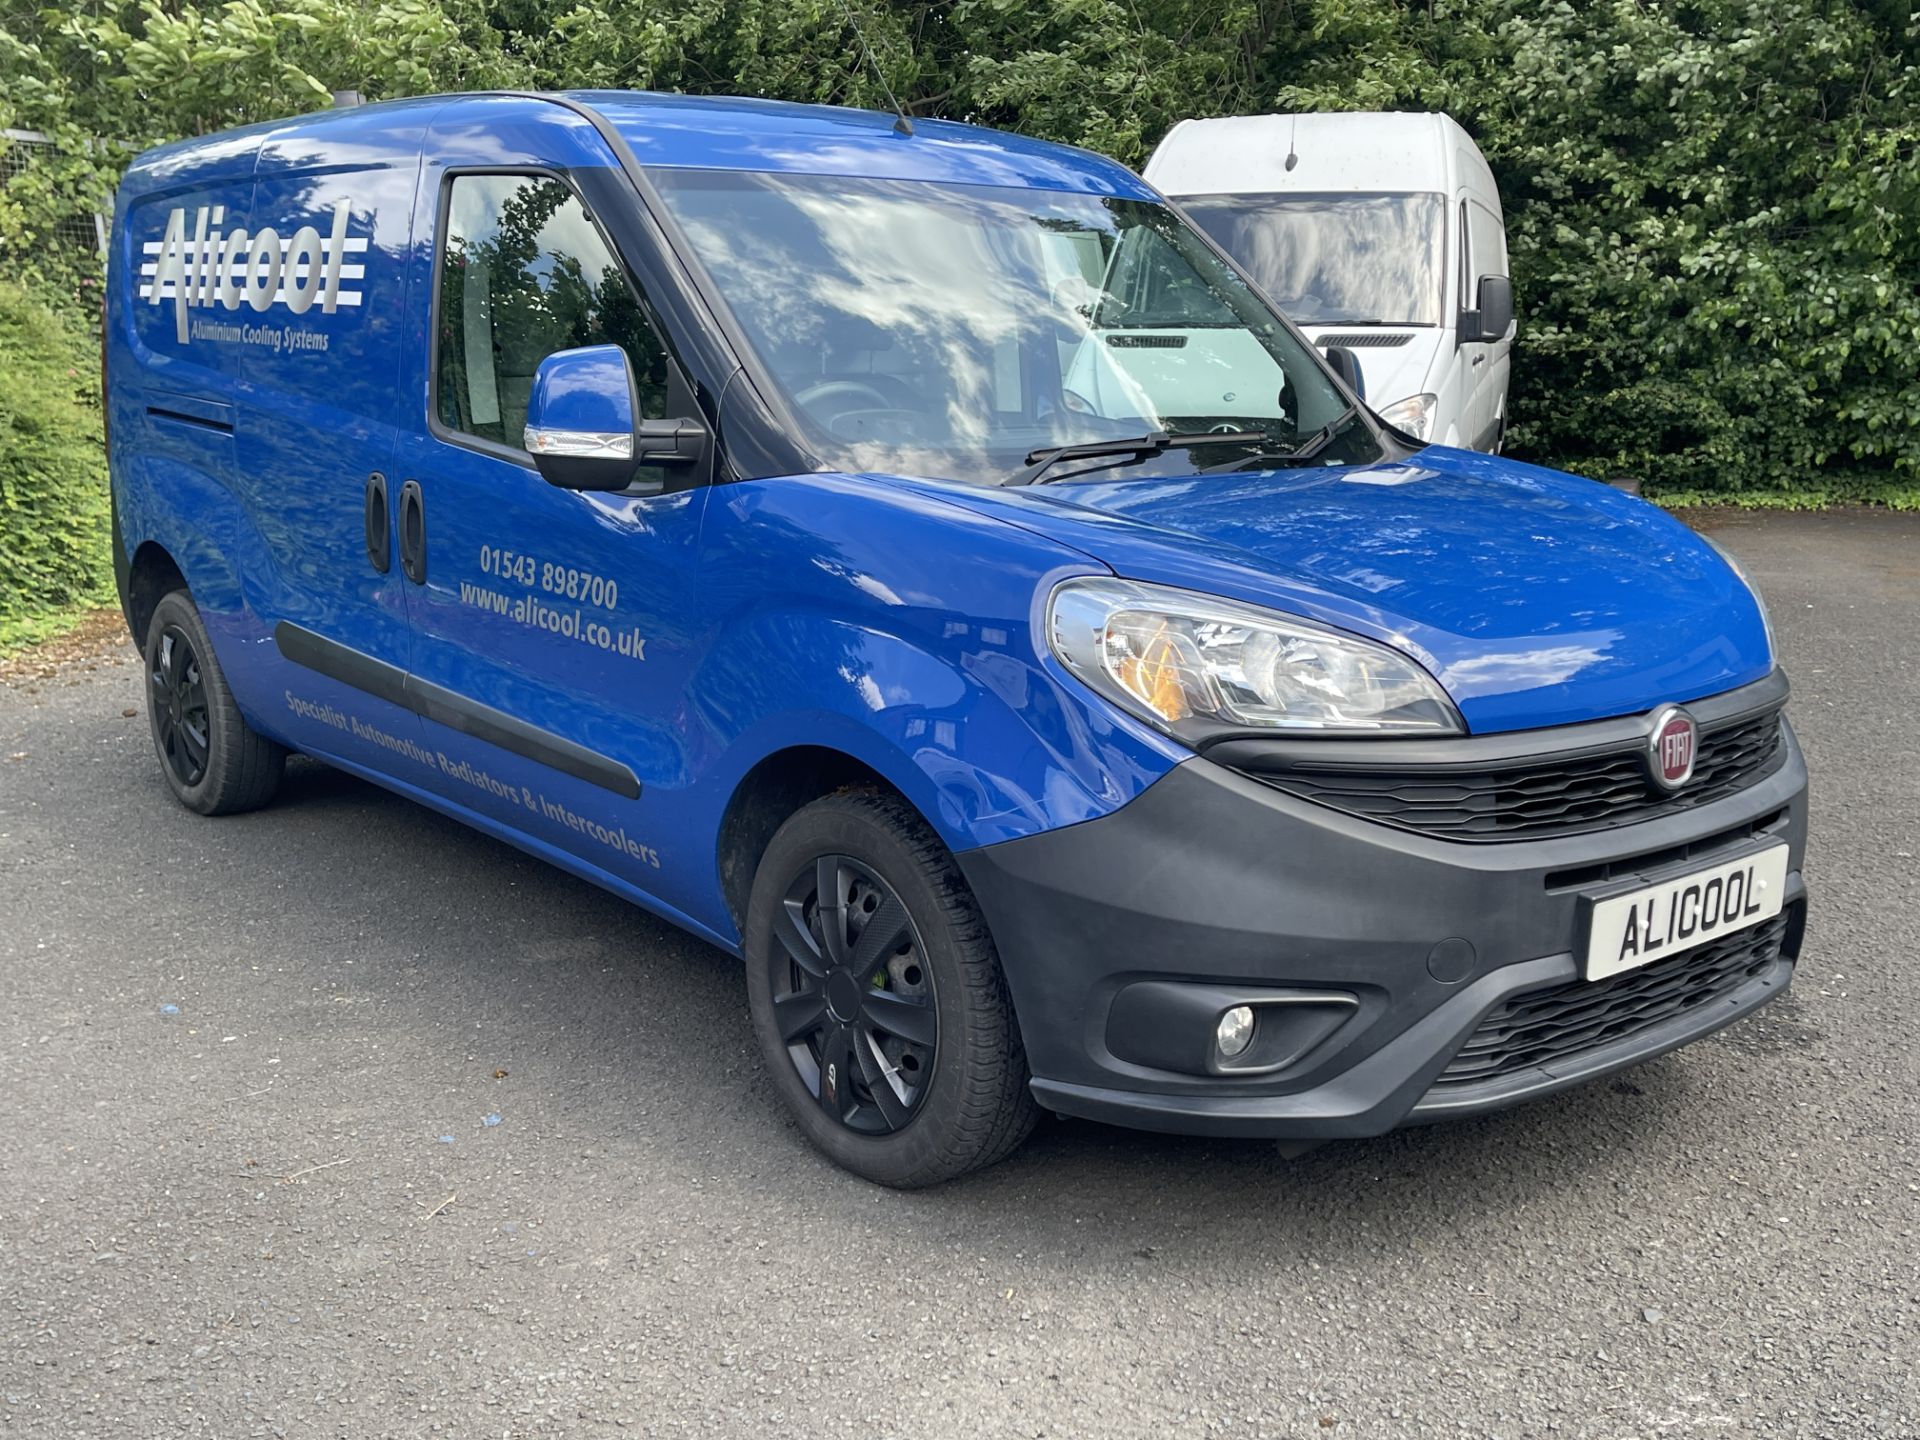 2016 - Fiat Doblo SX Mulijet 1,248cc Diesel Panel Van - High Level of Factory Options and Low Miles - Image 10 of 59